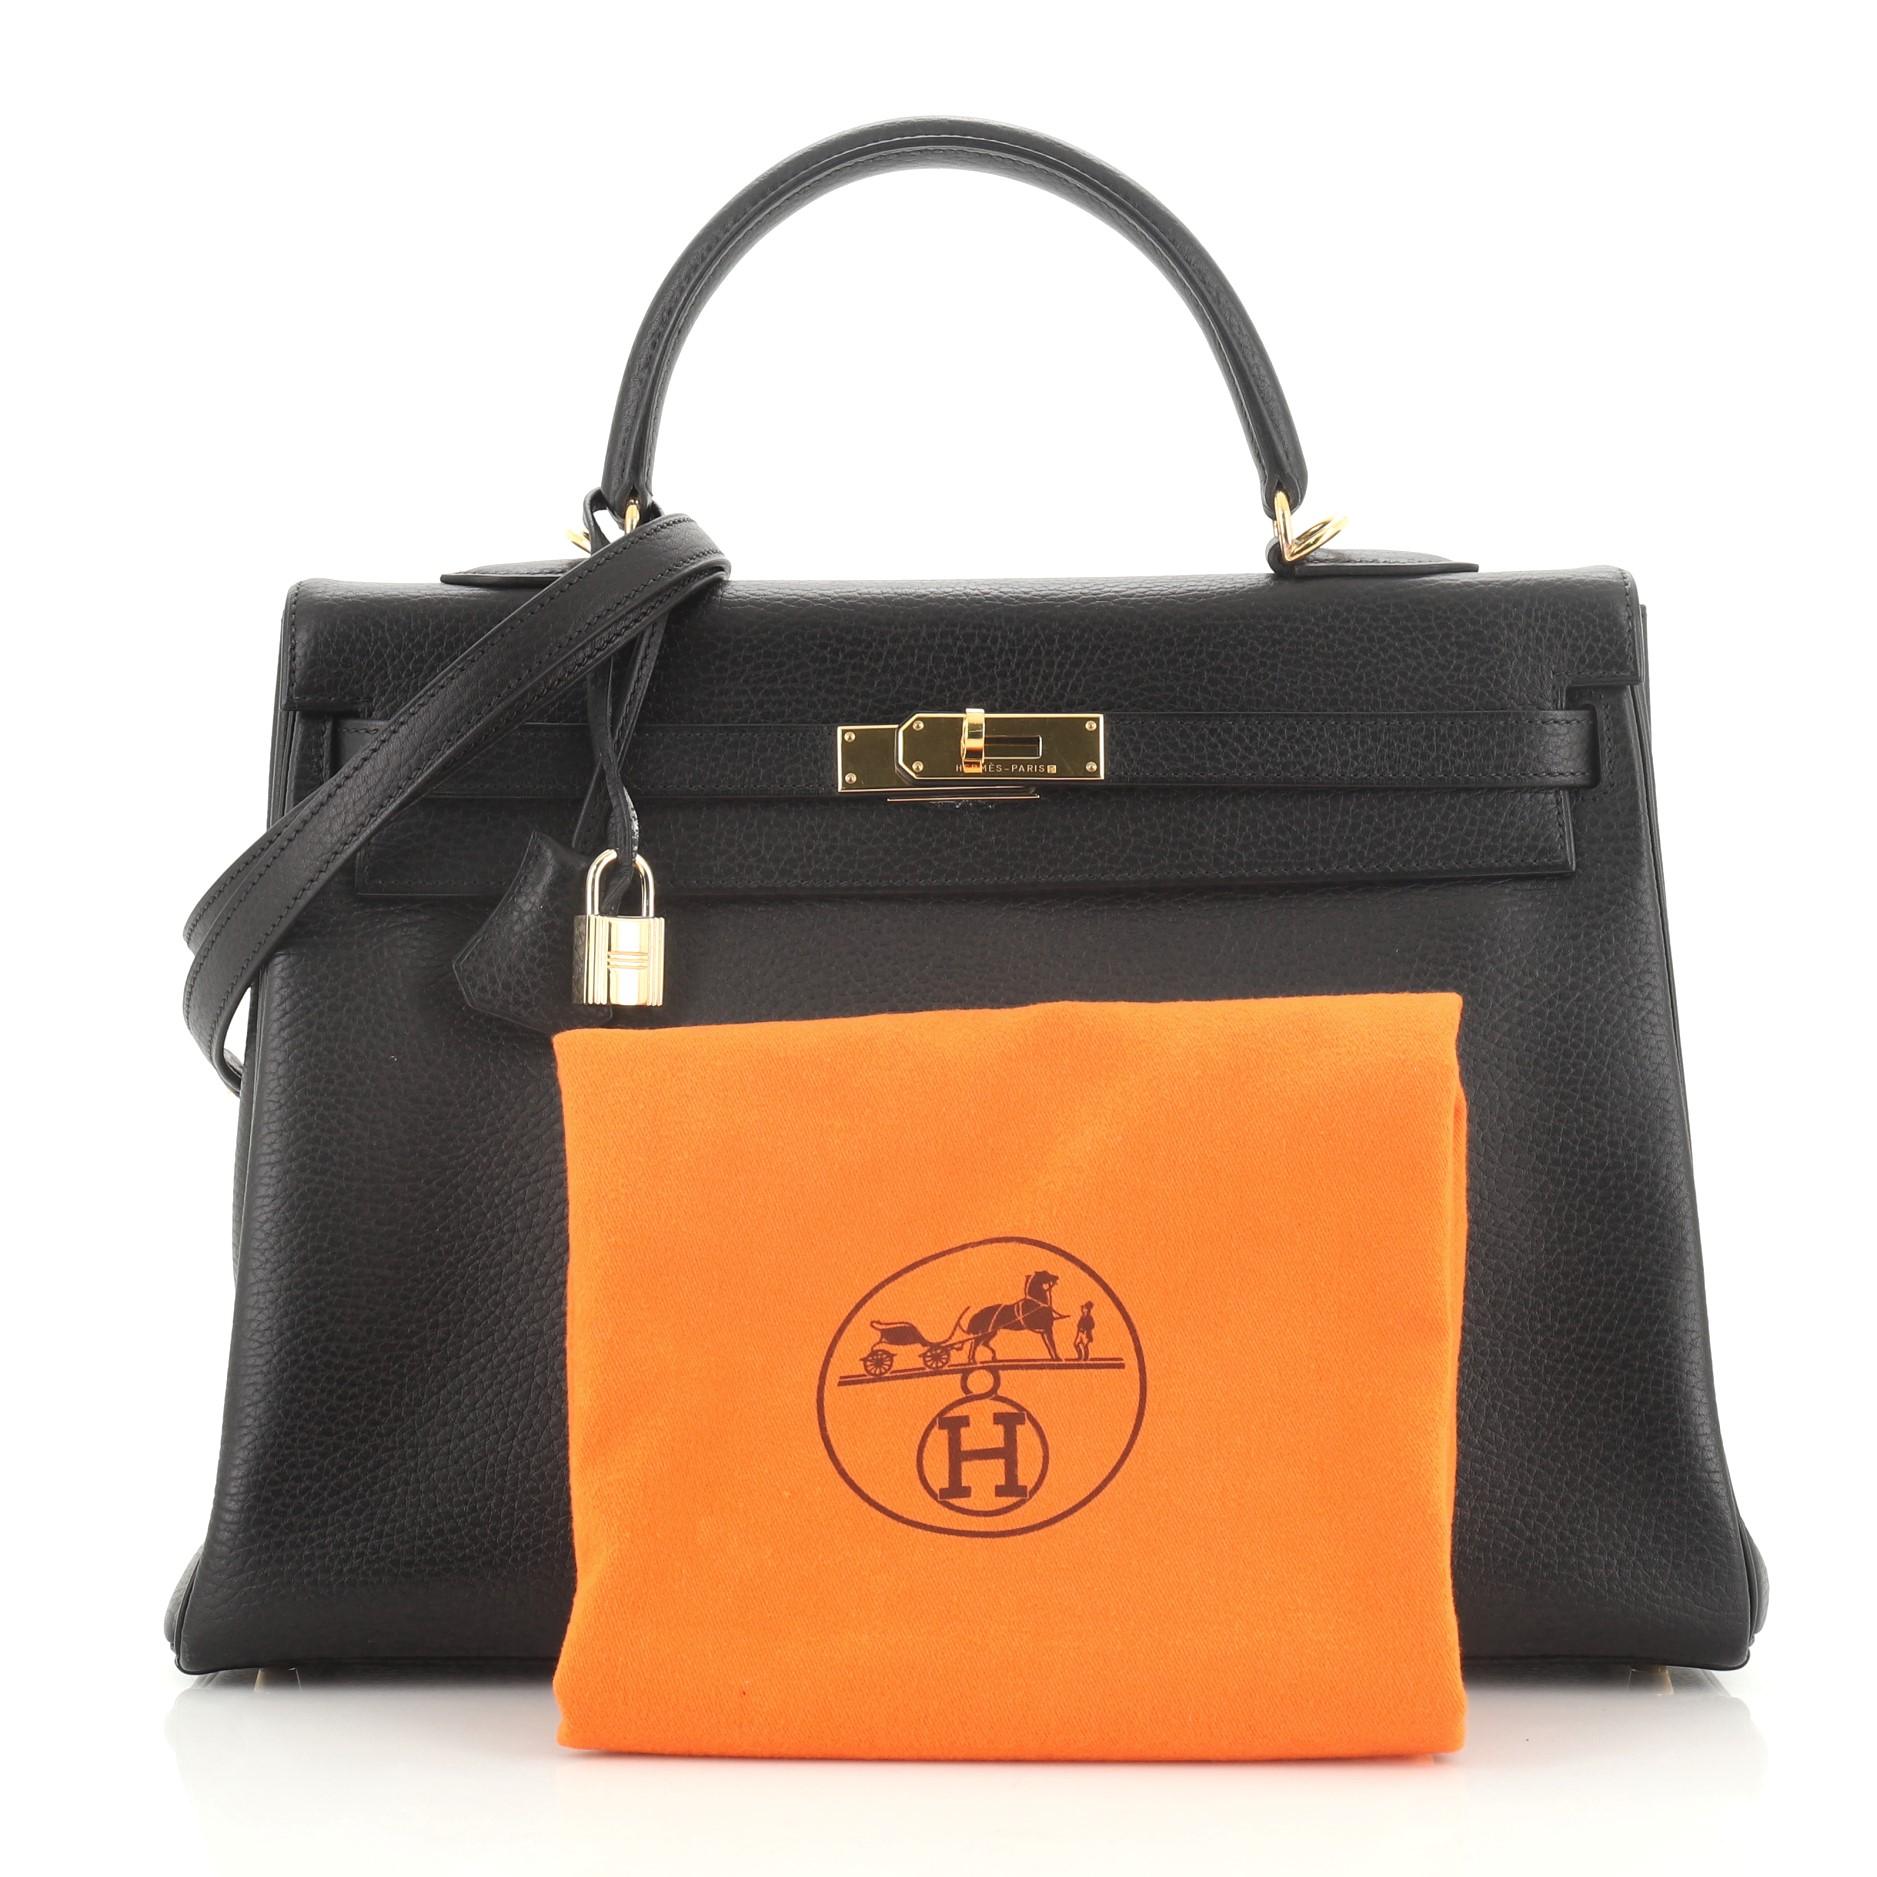 This Hermes Kelly Handbag Noir Ardennes with Gold Hardware 35, crafted in Noir black Ardennes leather, features a single top handle, frontal flap, and gold hardware. Its turn-lock closure opens to a Noir black Chevre leather interior with zip and